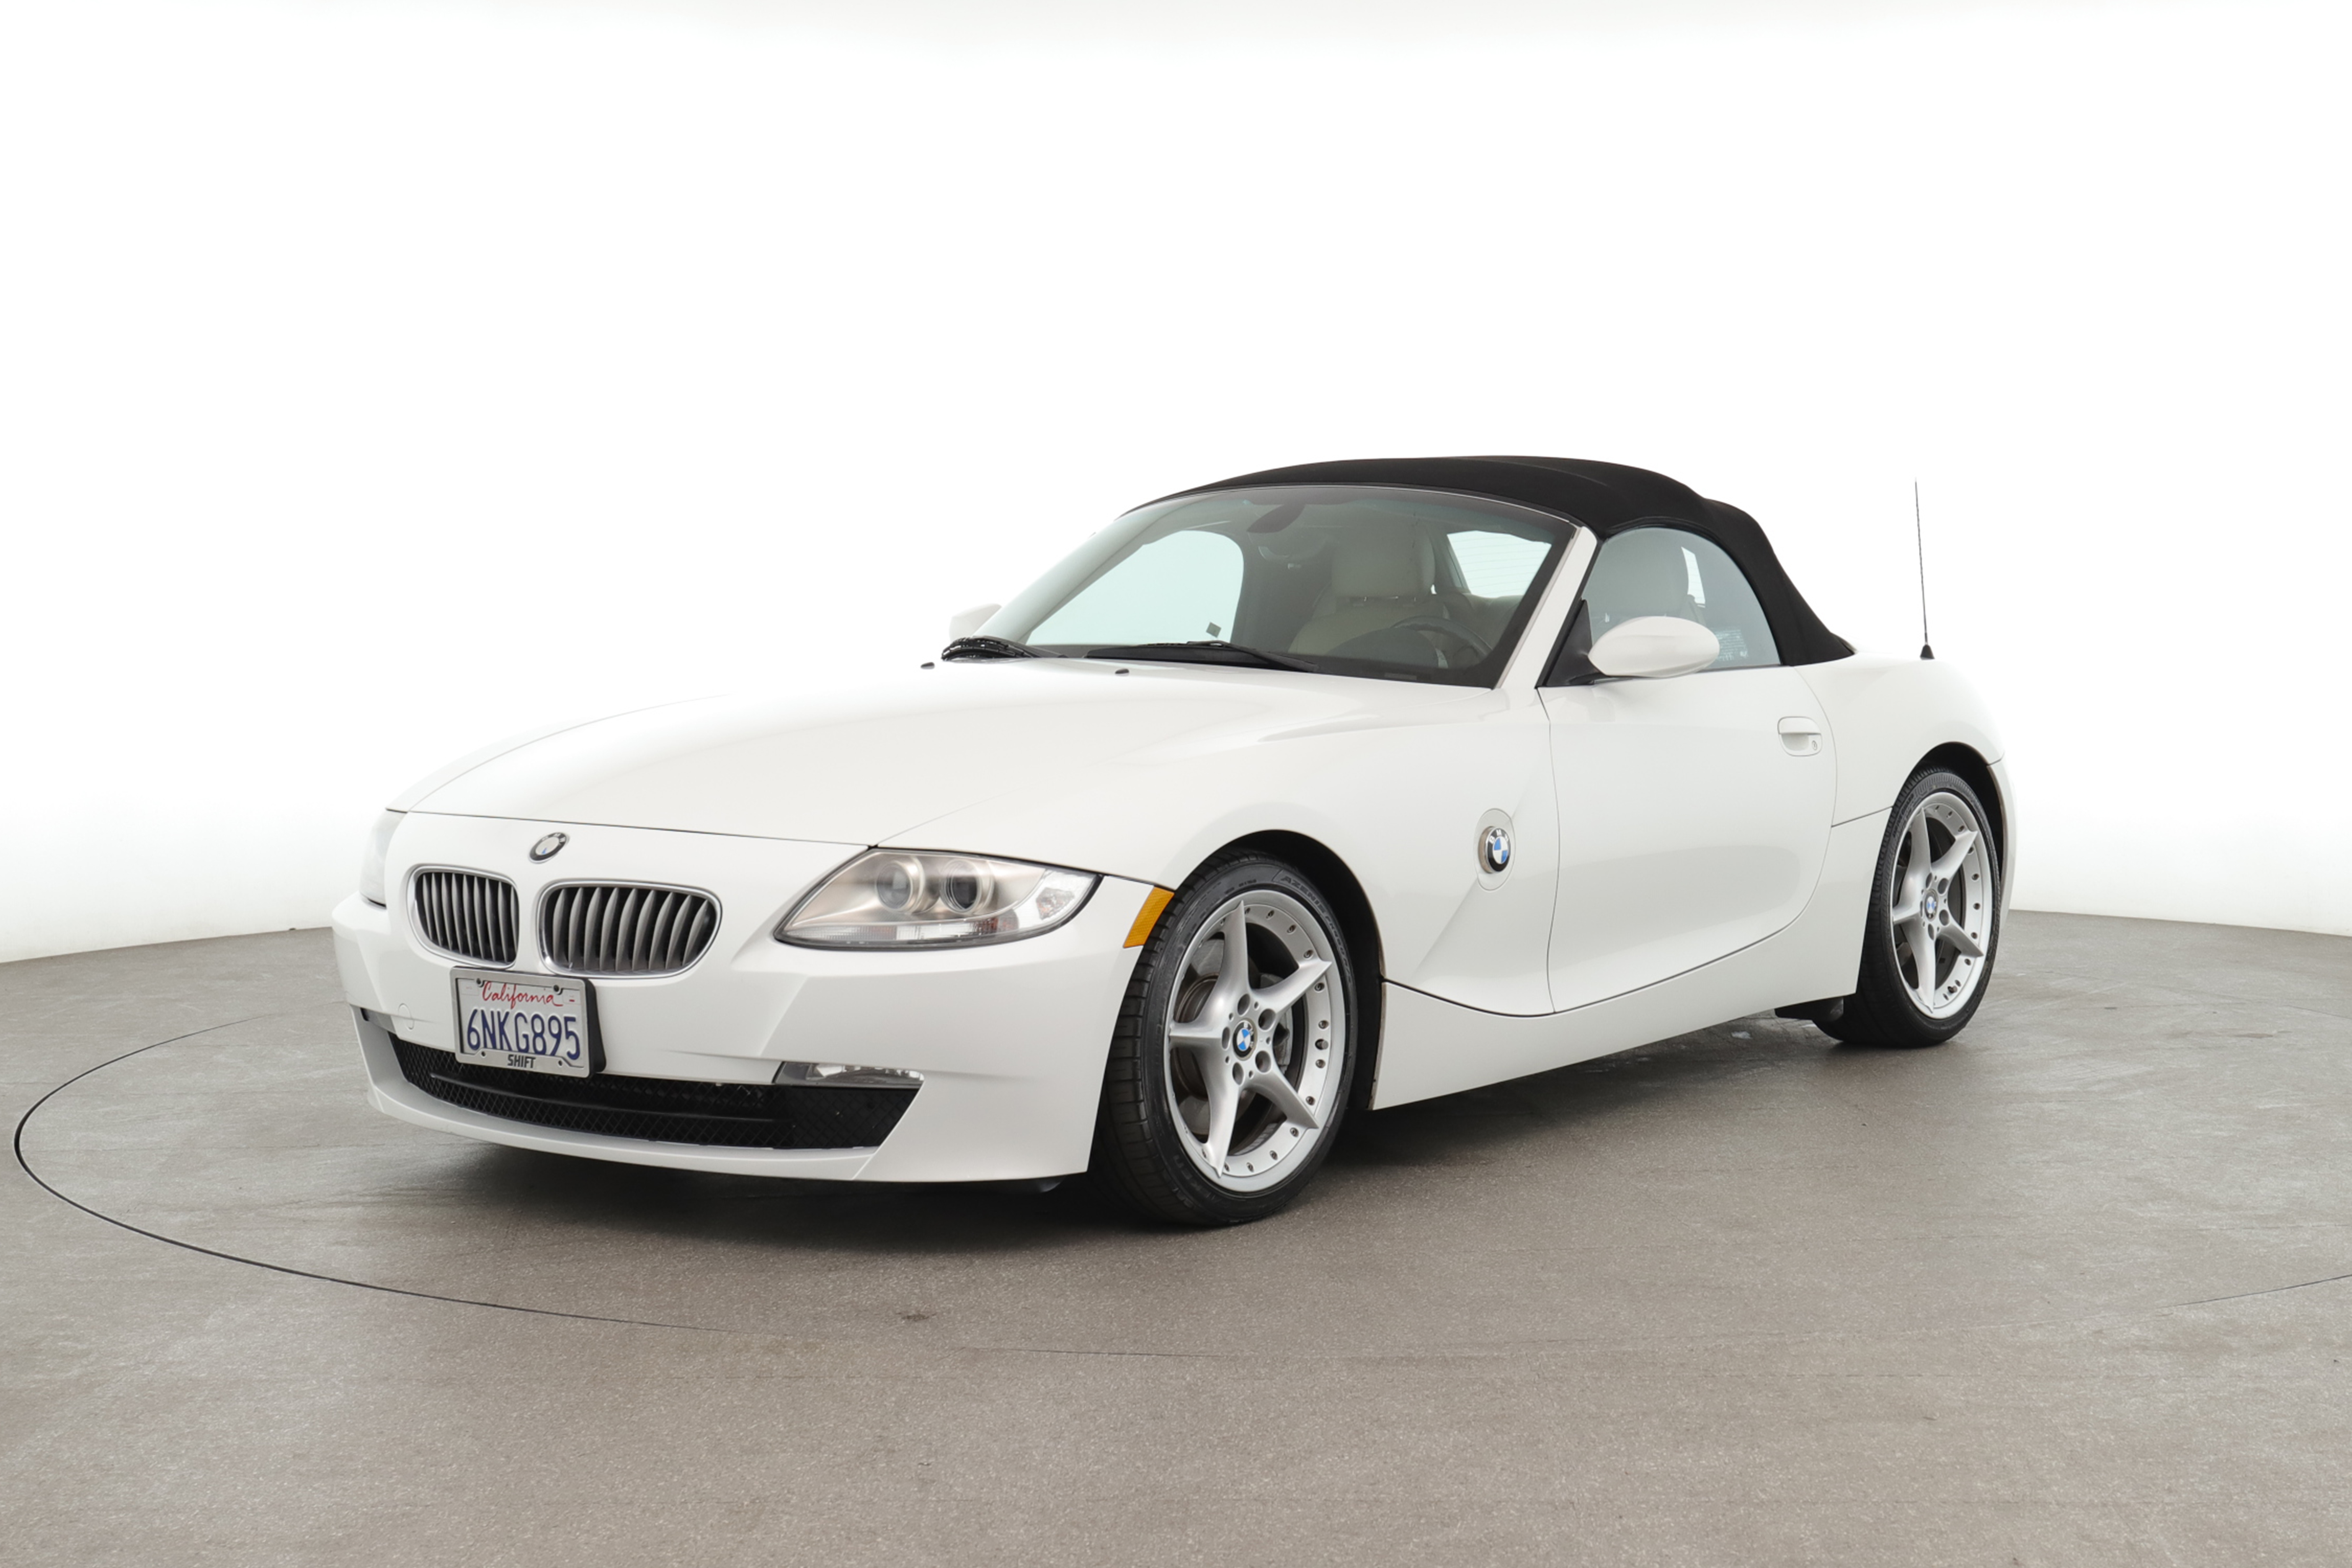 Used 2008 White BMW Z4 for $14,950